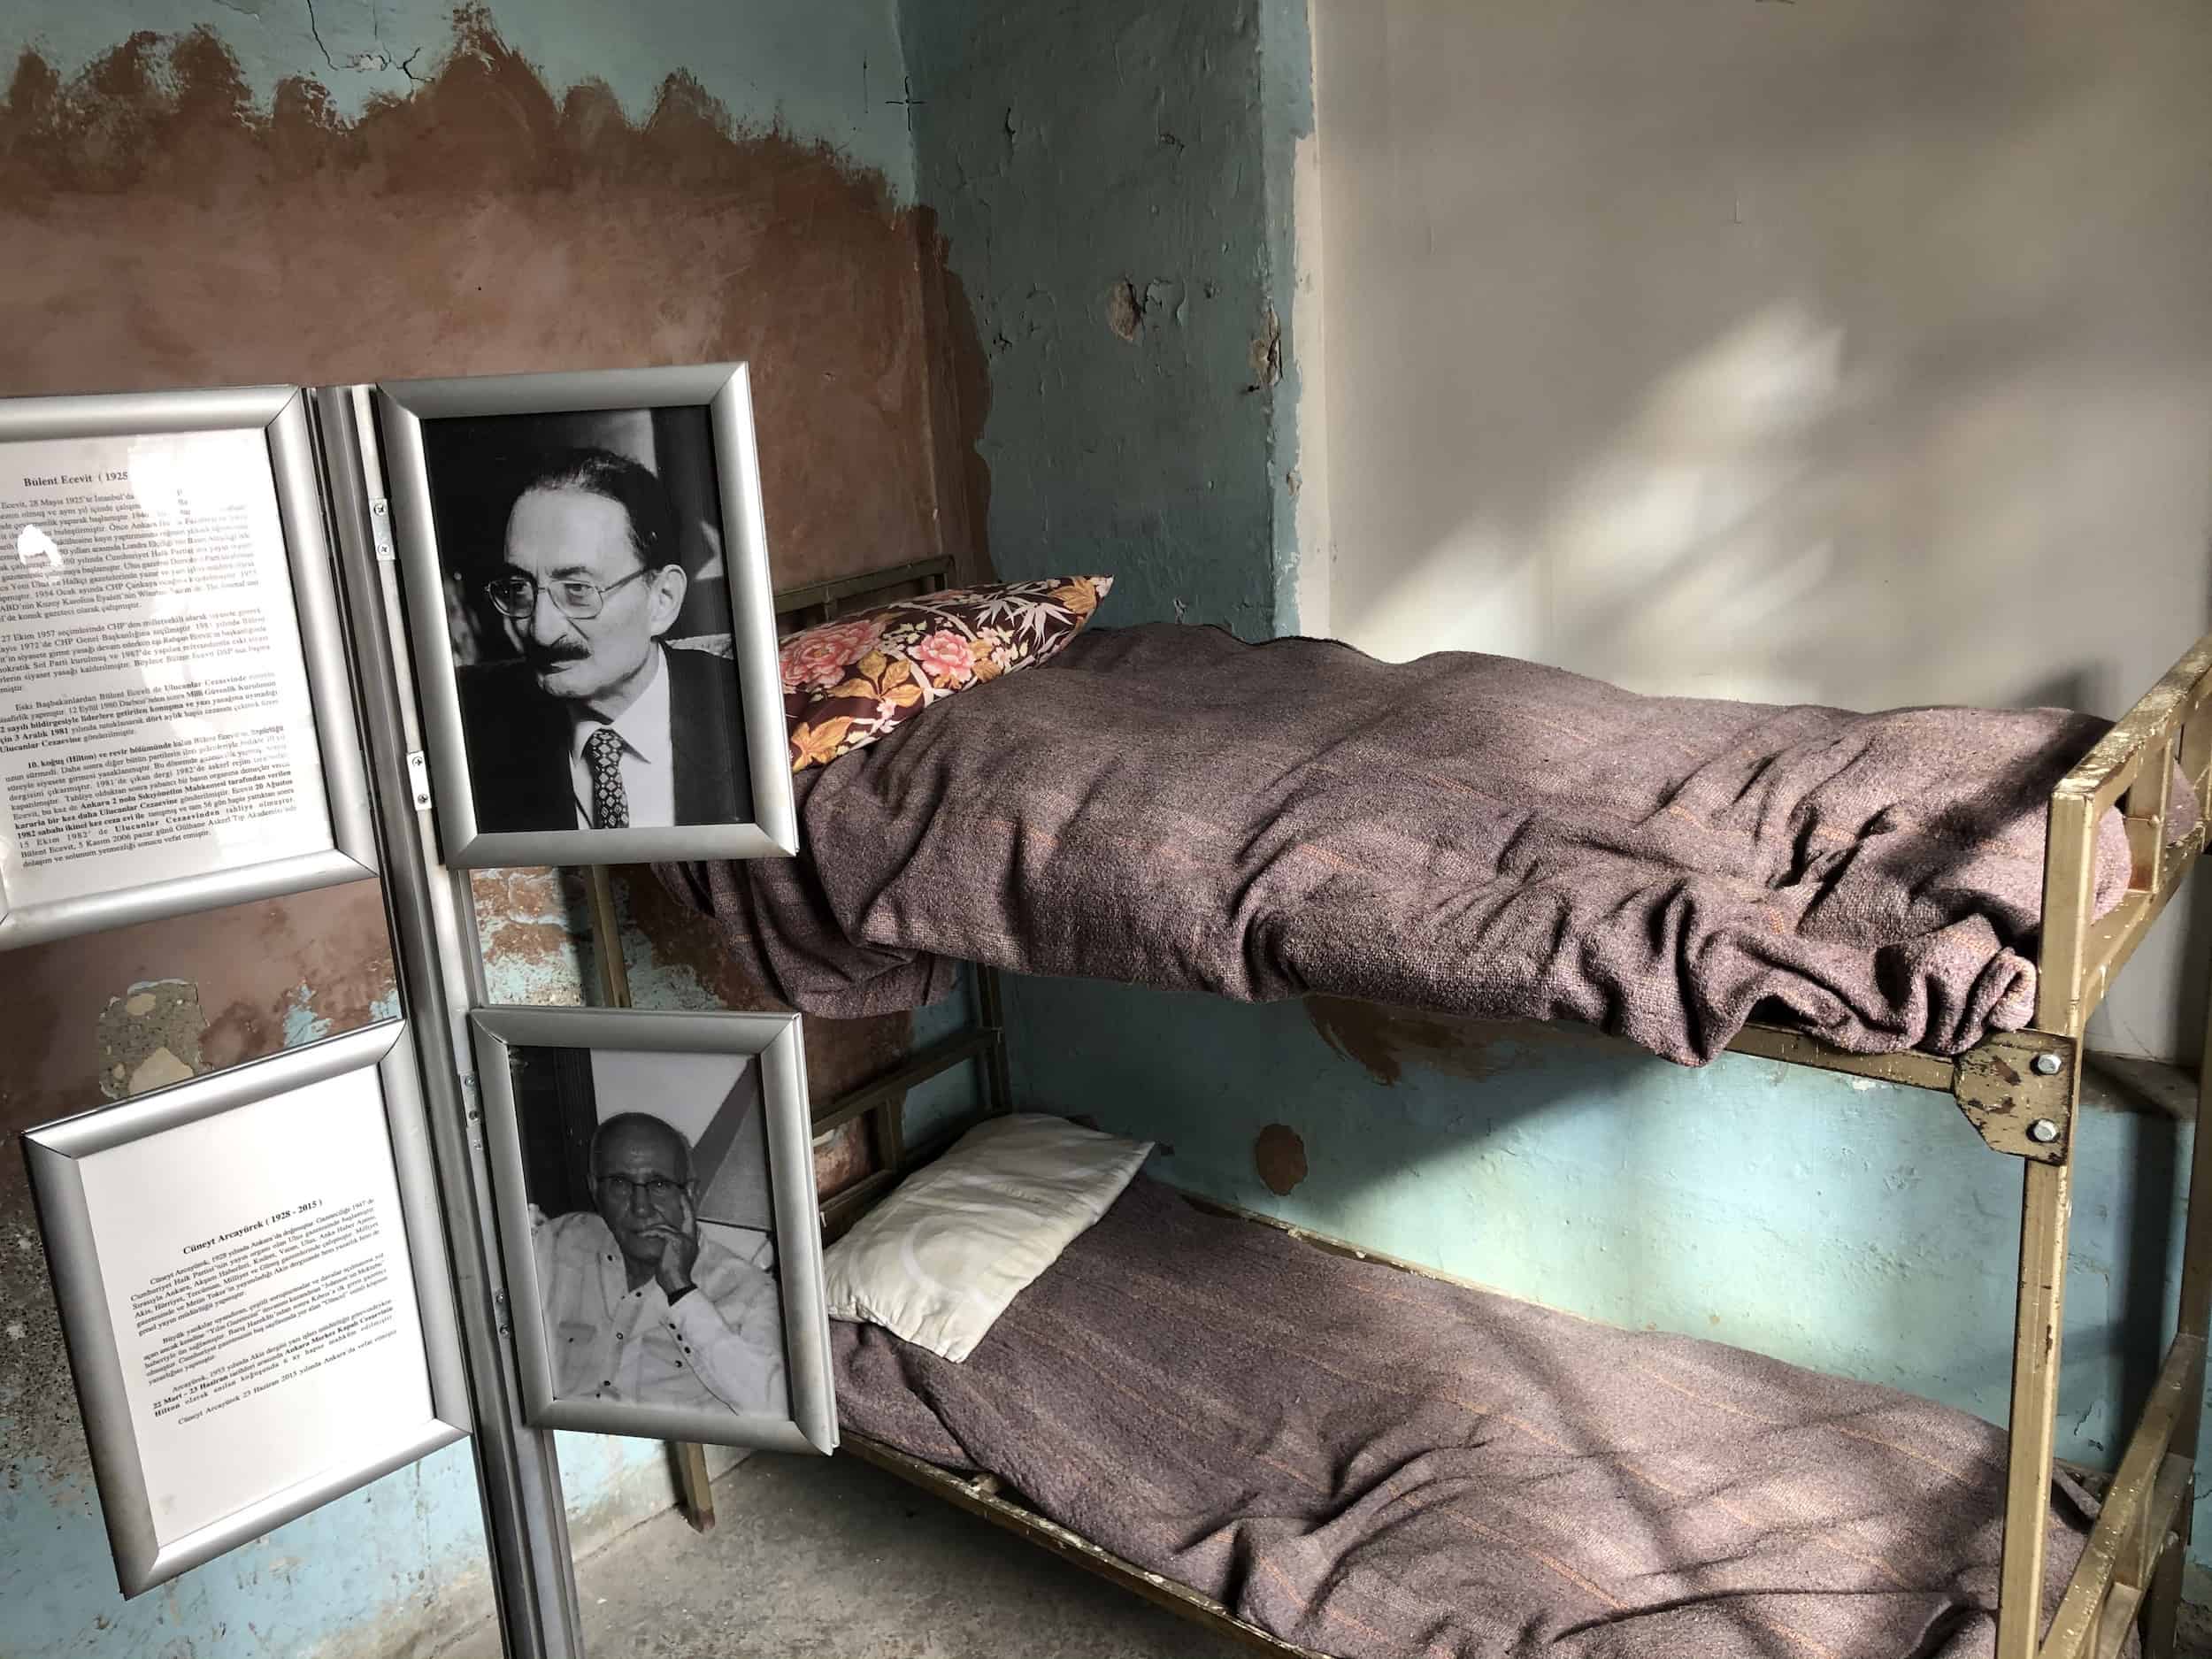 Bunk beds with profiles of political prisoners who stayed at the Hilton at Ulucanlar Prison in Ankara, Turkey